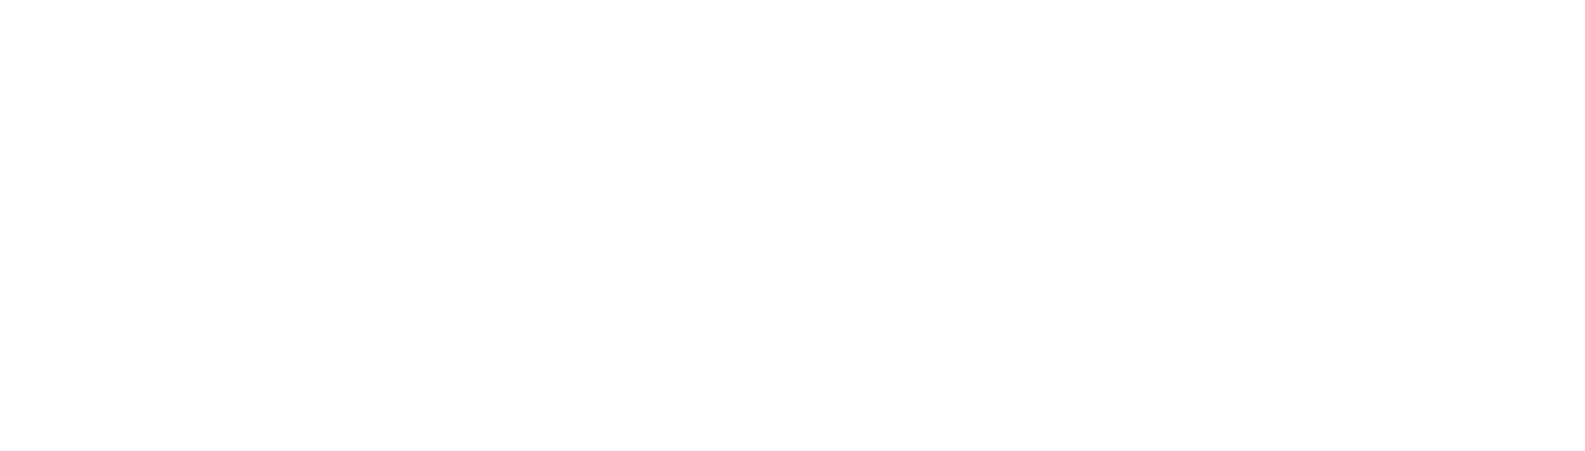 Chemours
 logo large for dark backgrounds (transparent PNG)